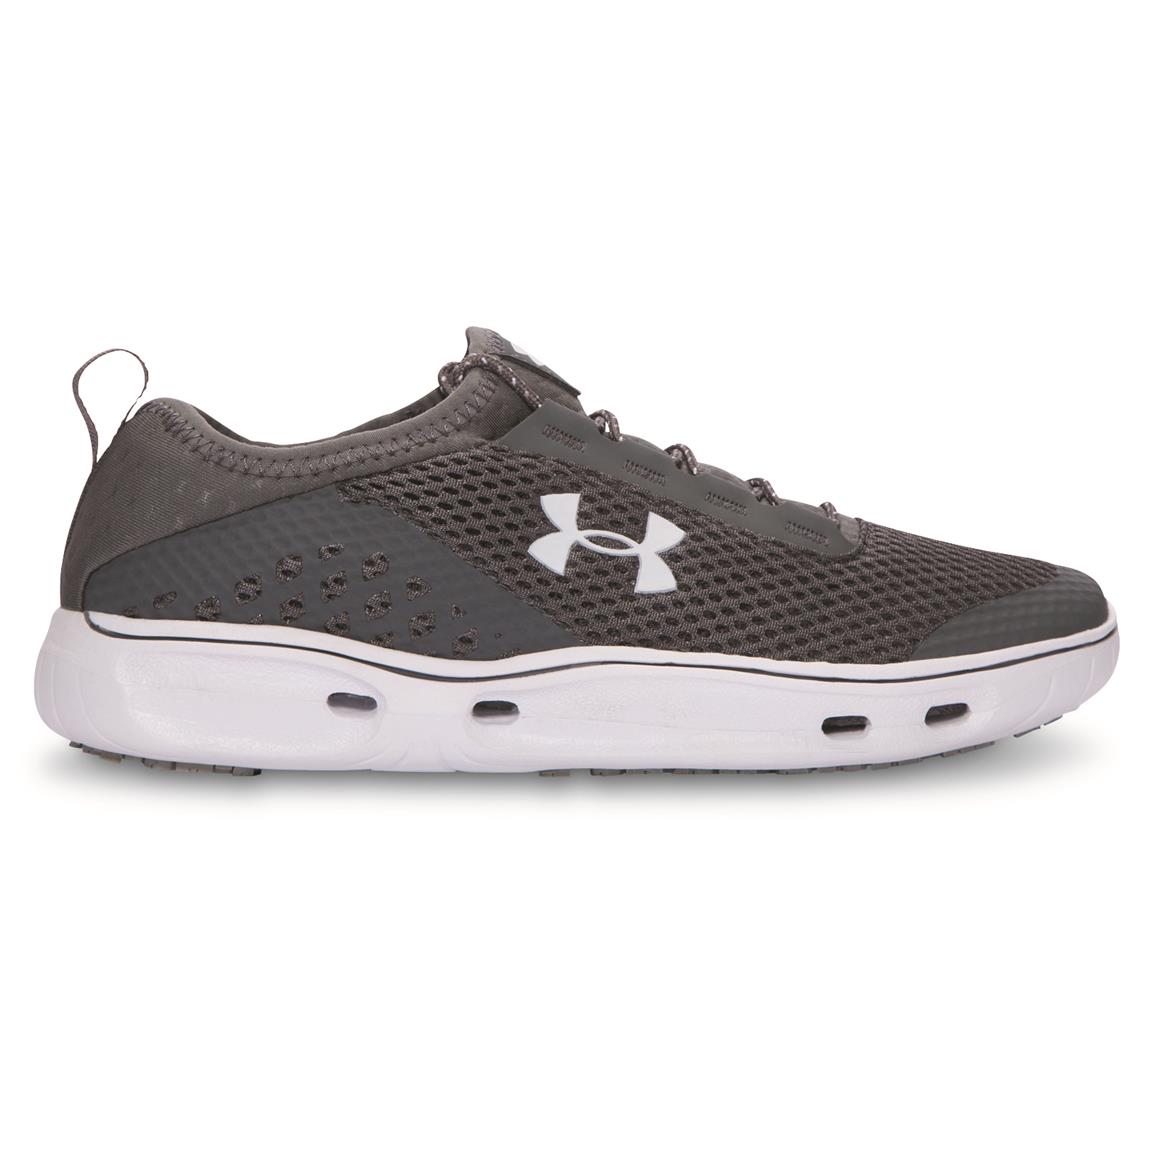 Under Armour Women's Kilchis Water Shoes 676722, Boat